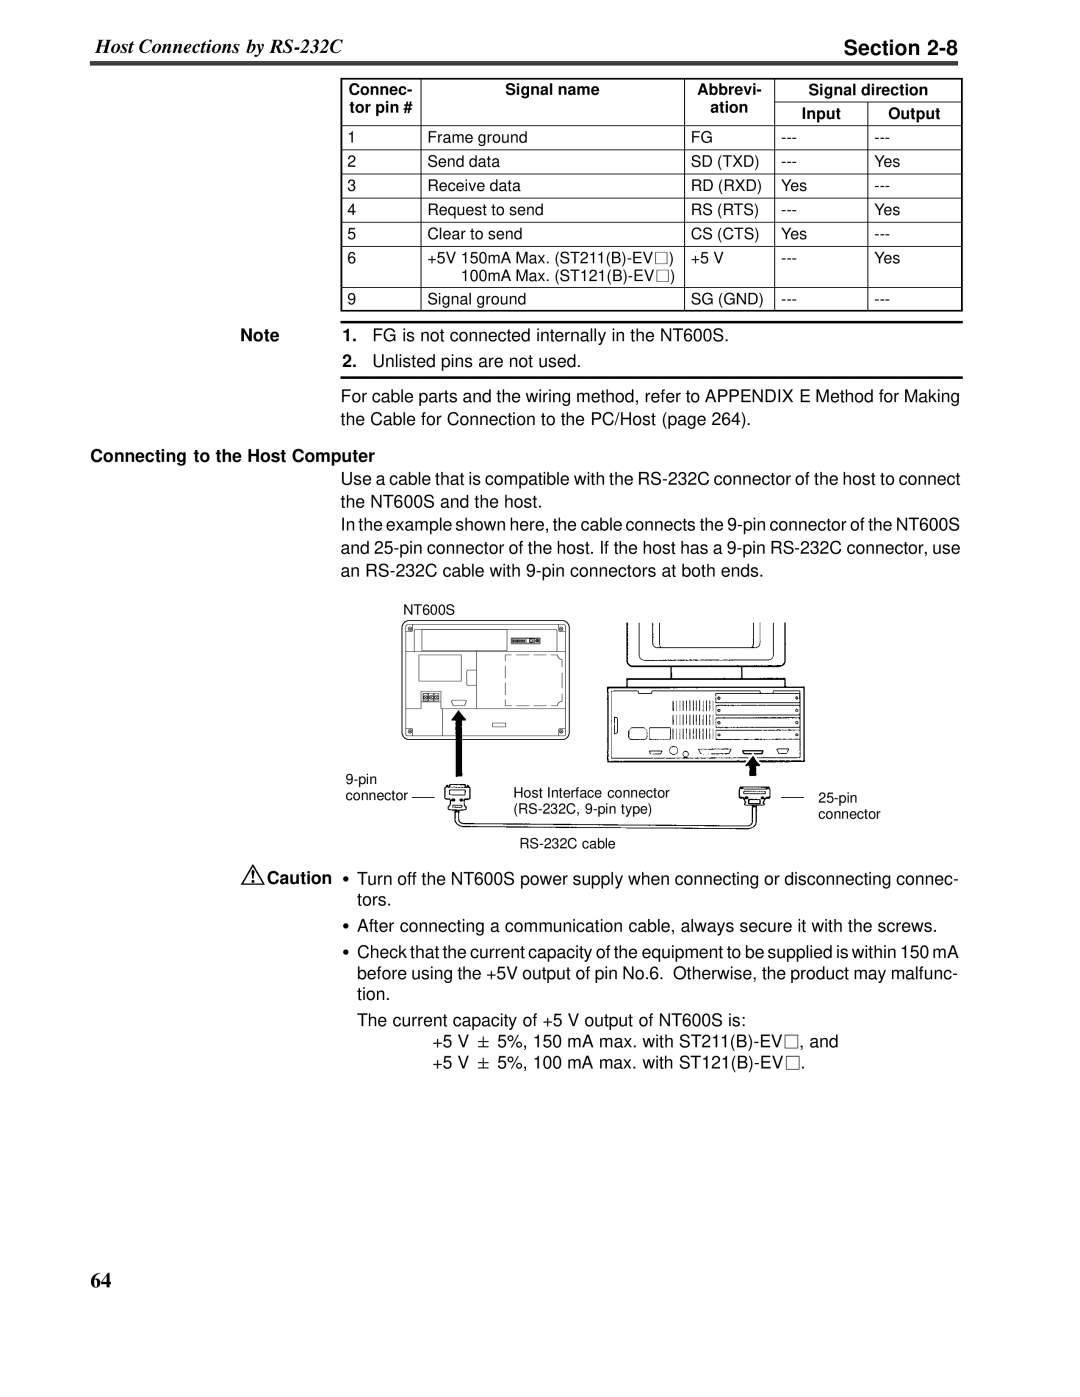 Omron V022-E3-1 operation manual Section, Connecting to the Host Computer 